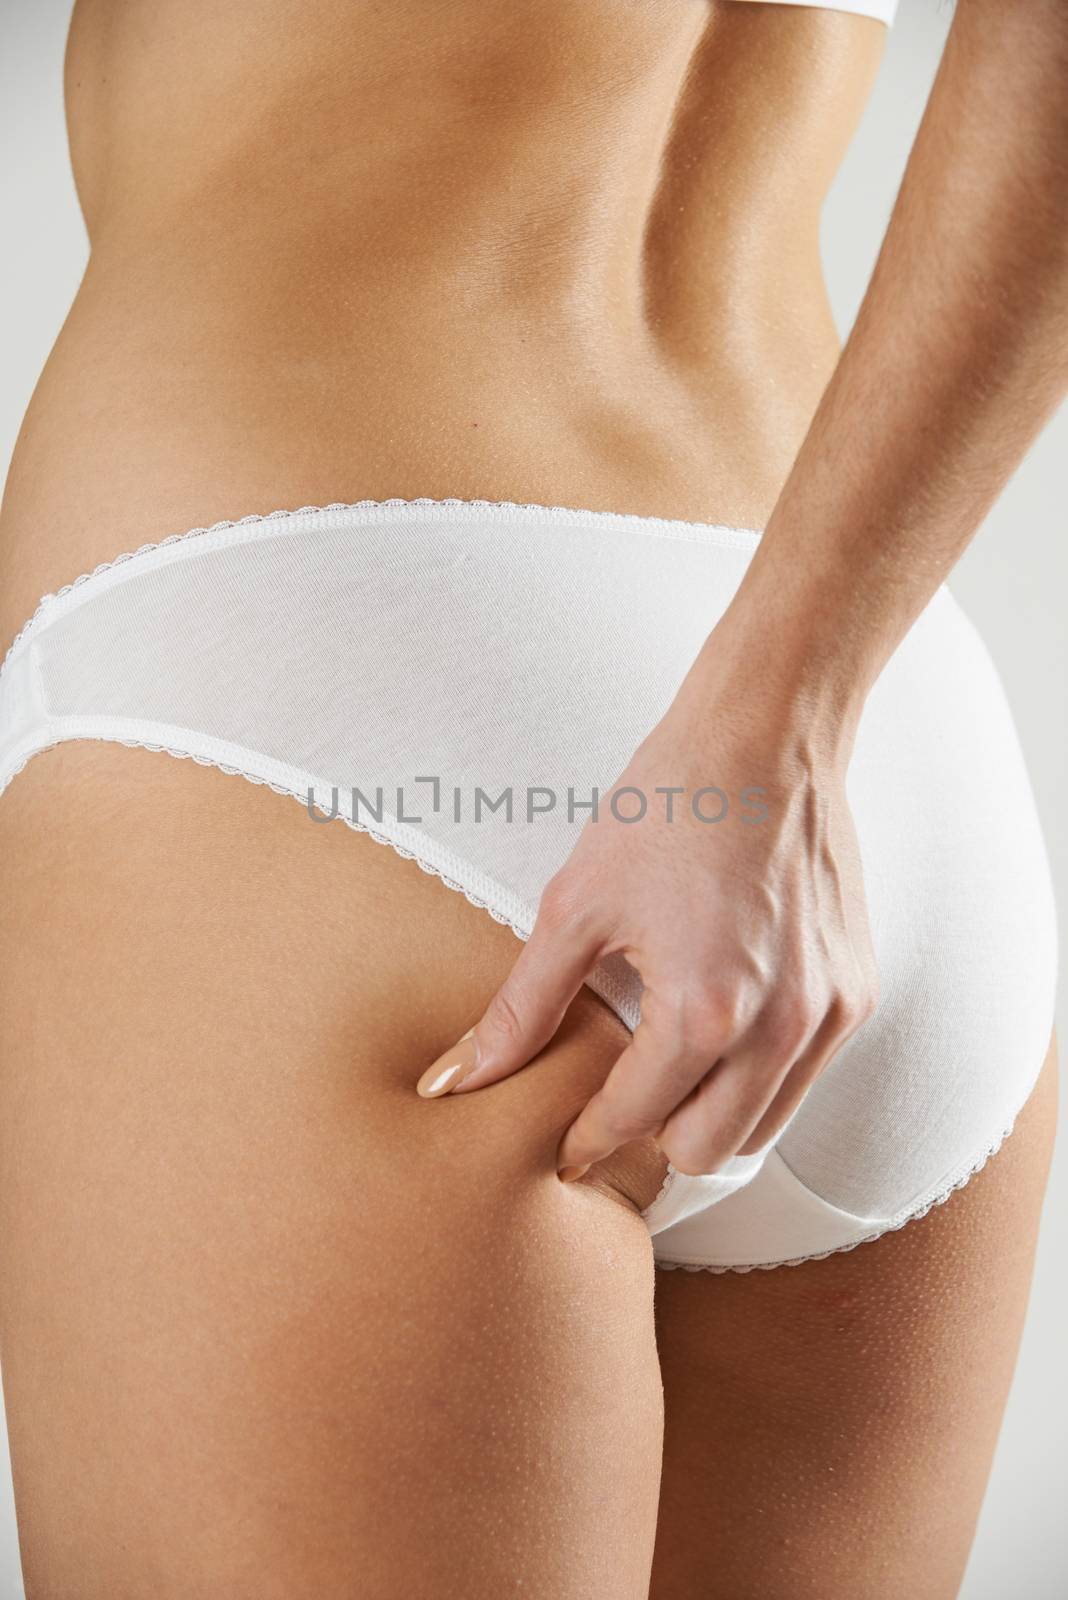 Close-Up Of Woman In Underwear Pinching Thigh